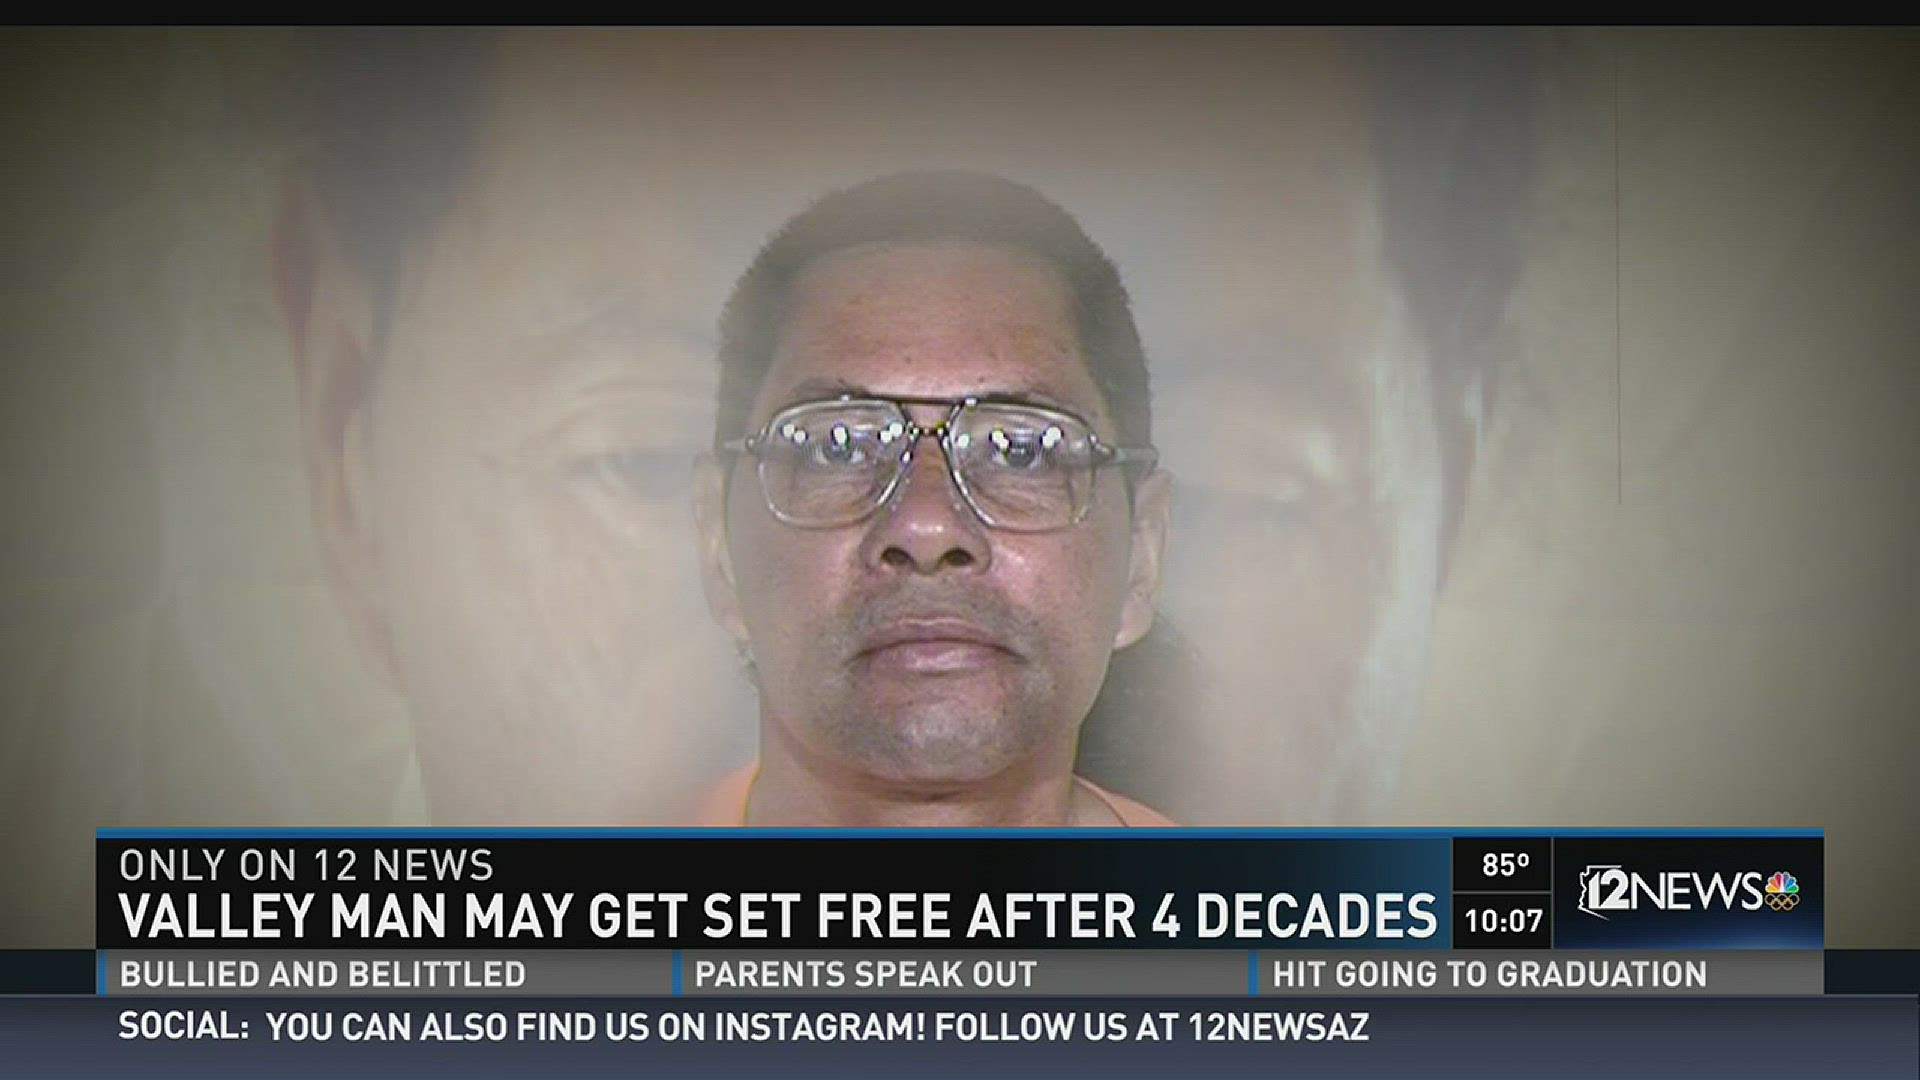 Valley man may get set free after 4 decades.